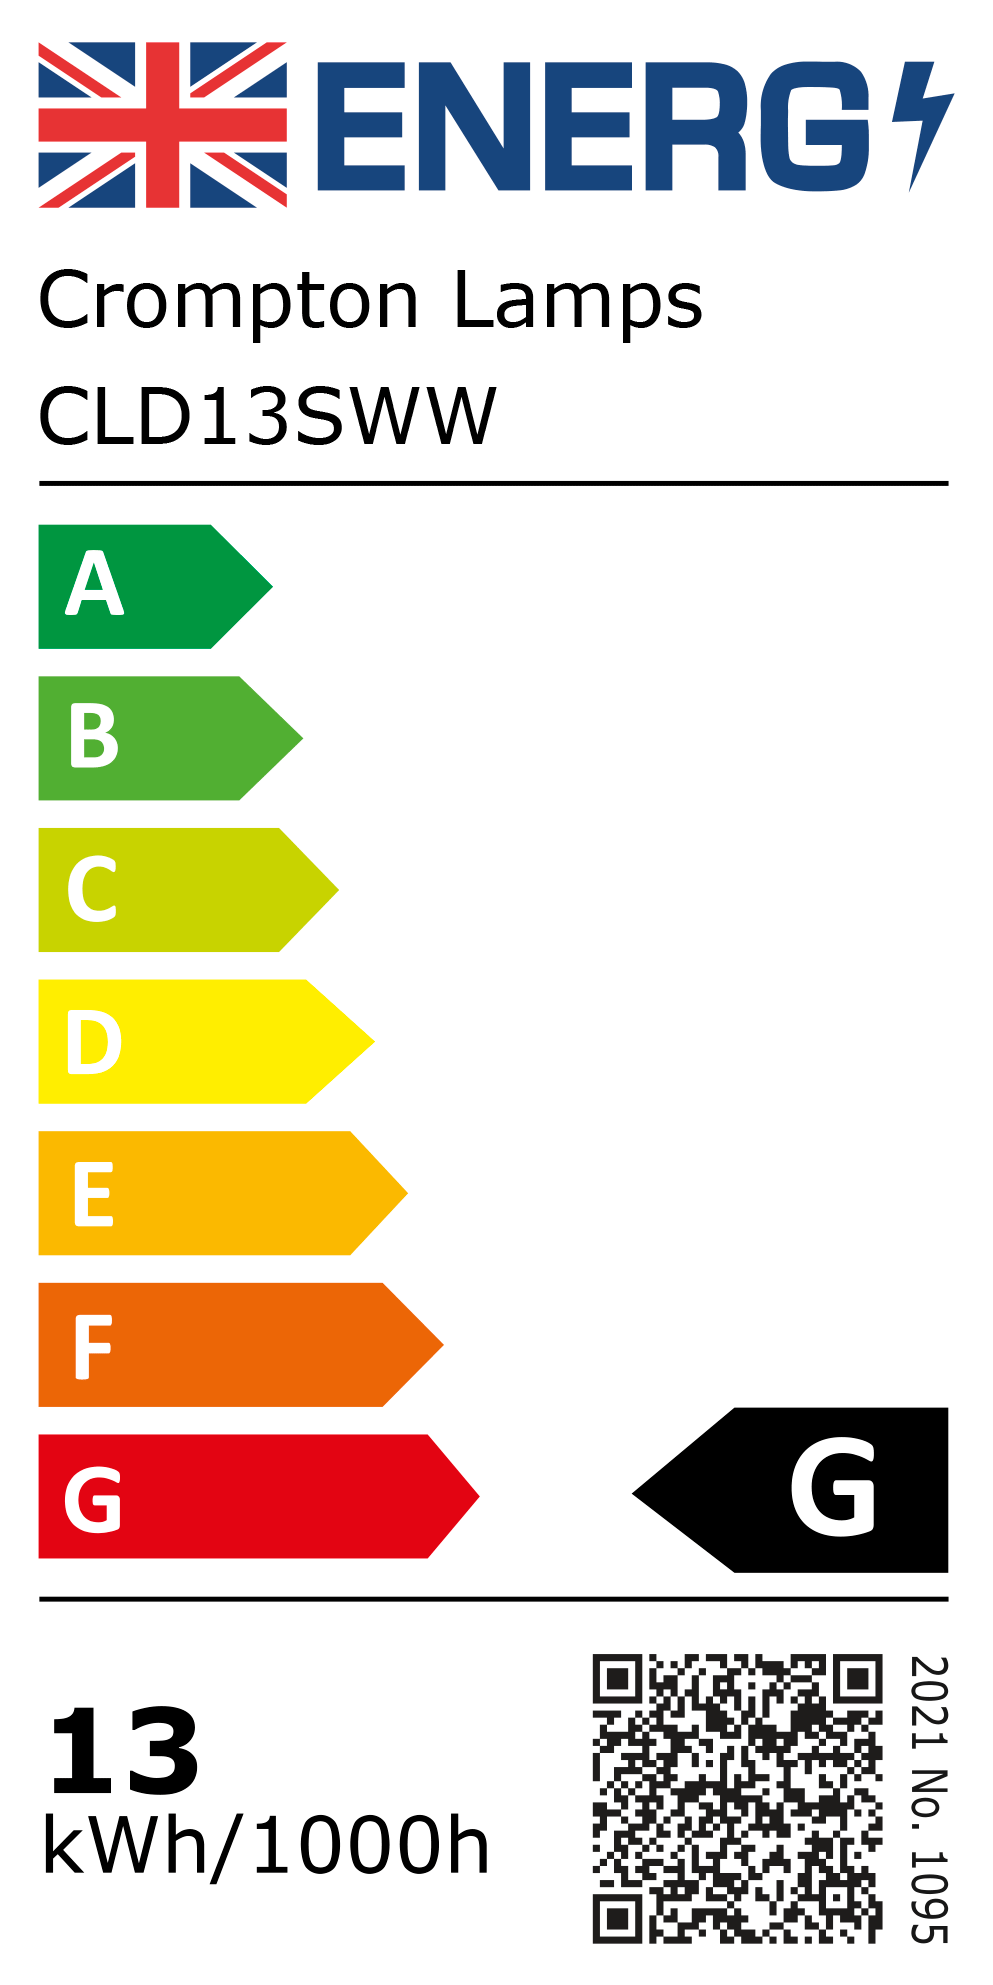 New 2021 Energy Rating Label: Stock Code CLD13SWW